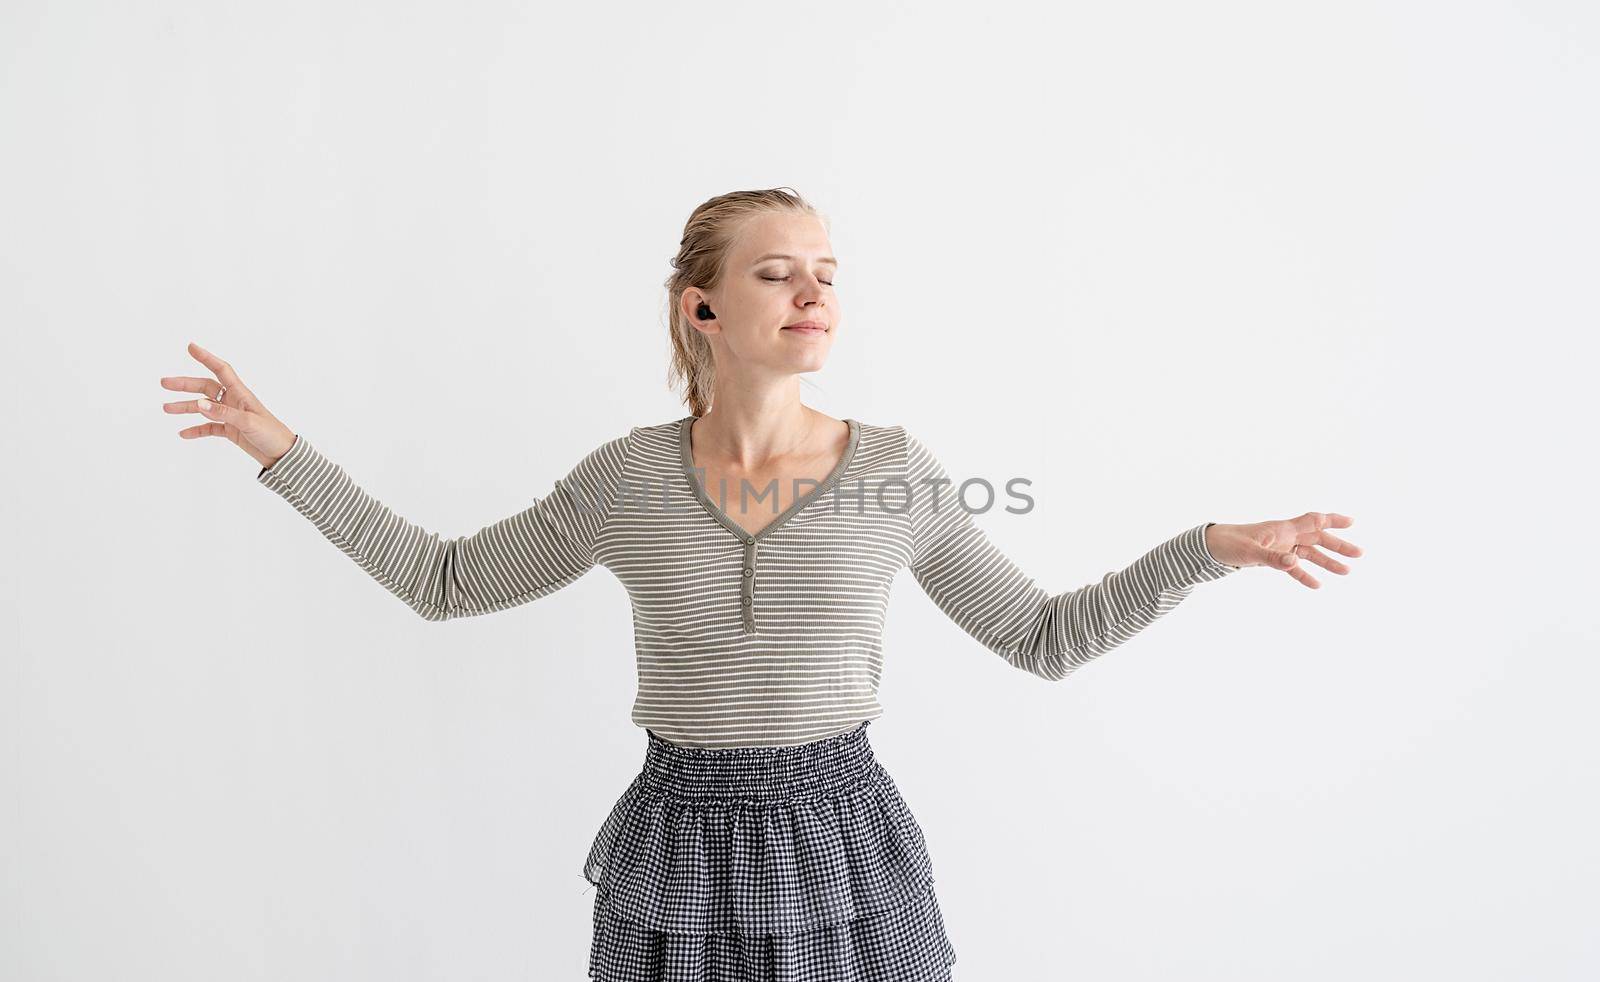 Music, isolation and leisure. Young woman holding wireless earbuds and dancing